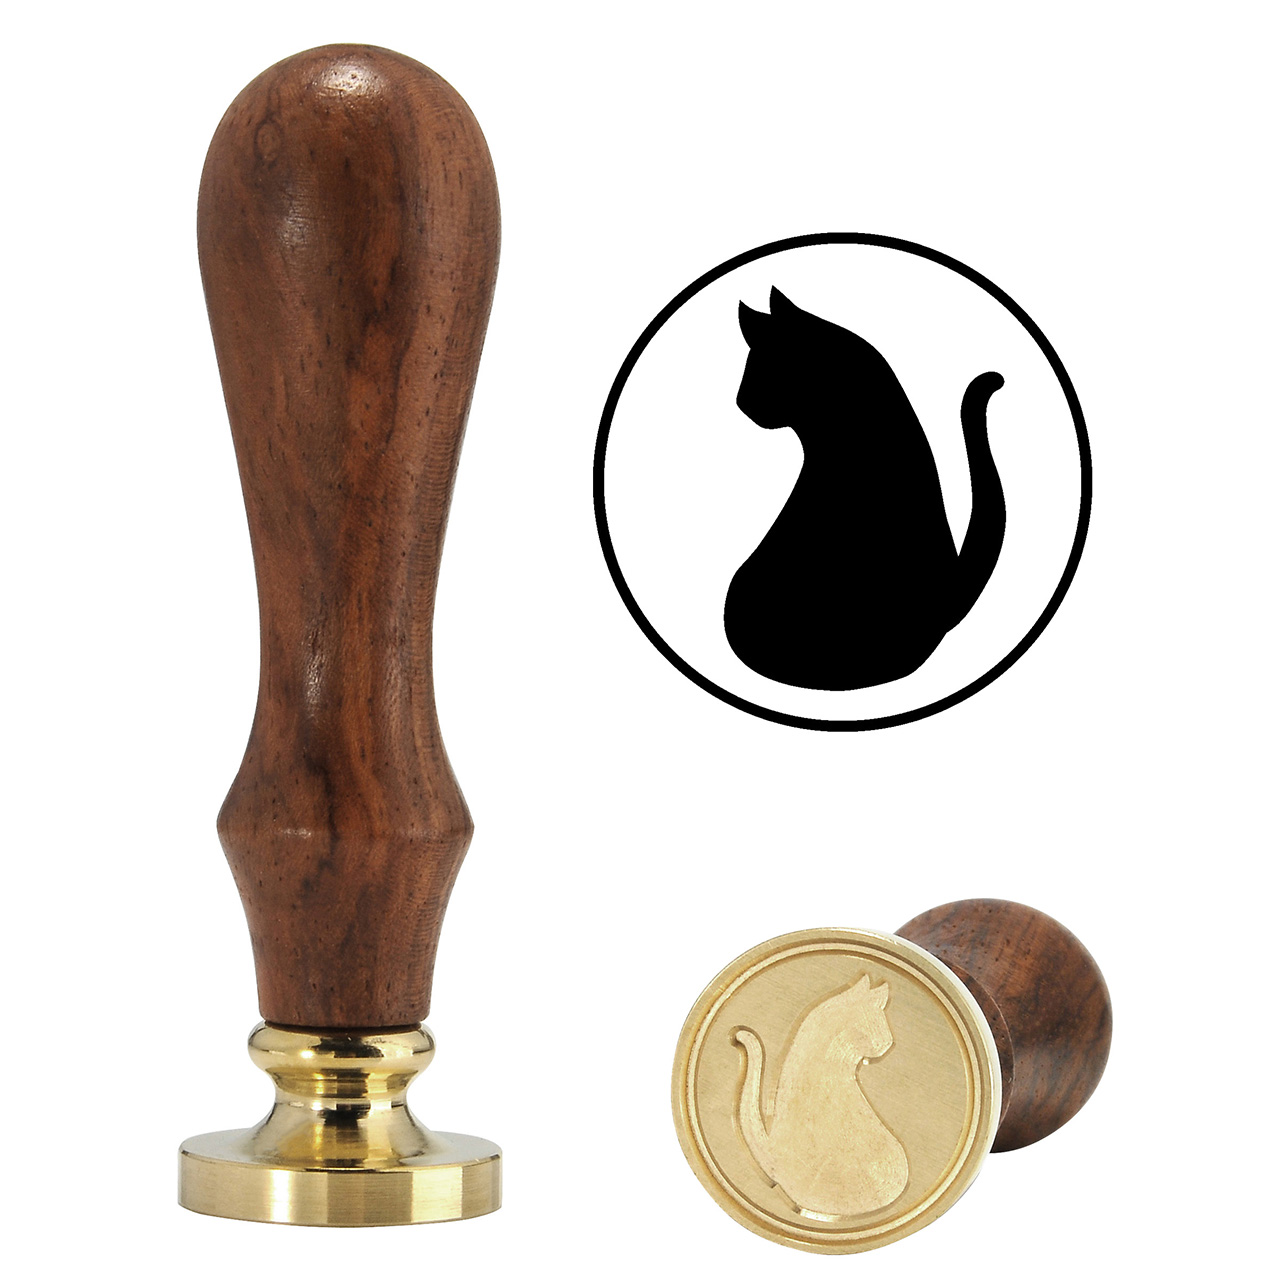 Lovely Cat Wax Stamp, Yoption Vintage Retro Lovely Cat Sealing Wax Seal Stamp, Great for Embellishment of Cards Envelopes, Invitations, Wine Packages, Gift Idea (Cat # 2)